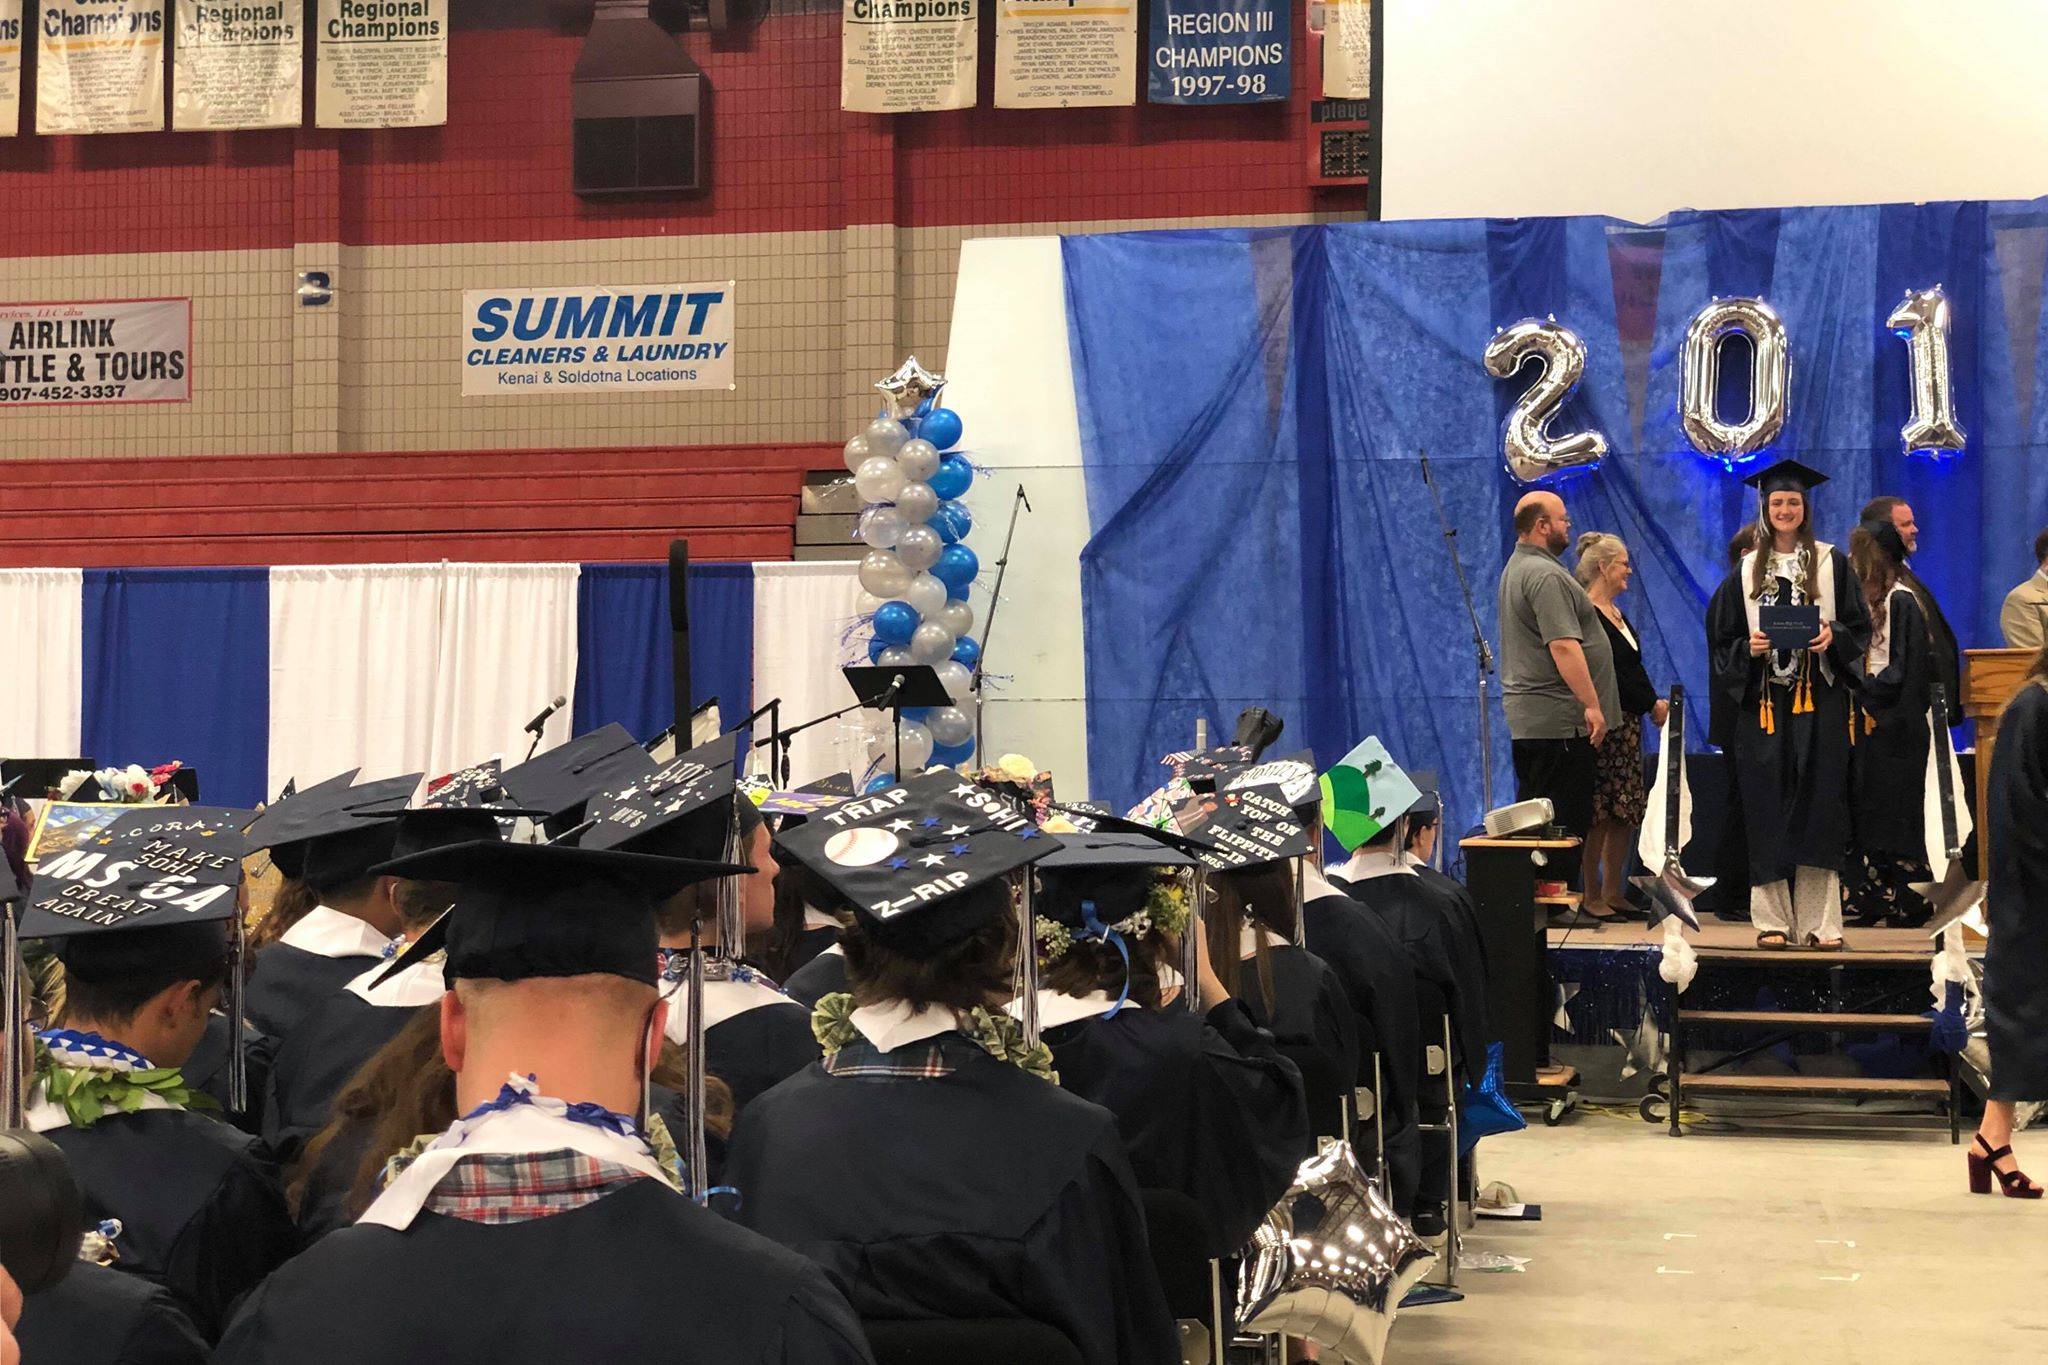 Soldotna High School graduates wait to walk across the stage at Wednesday’s ceremony May 22, 2019, in Soldotna, Alaska. (Photo by Victoria Petersen/Peninsula Clarion)